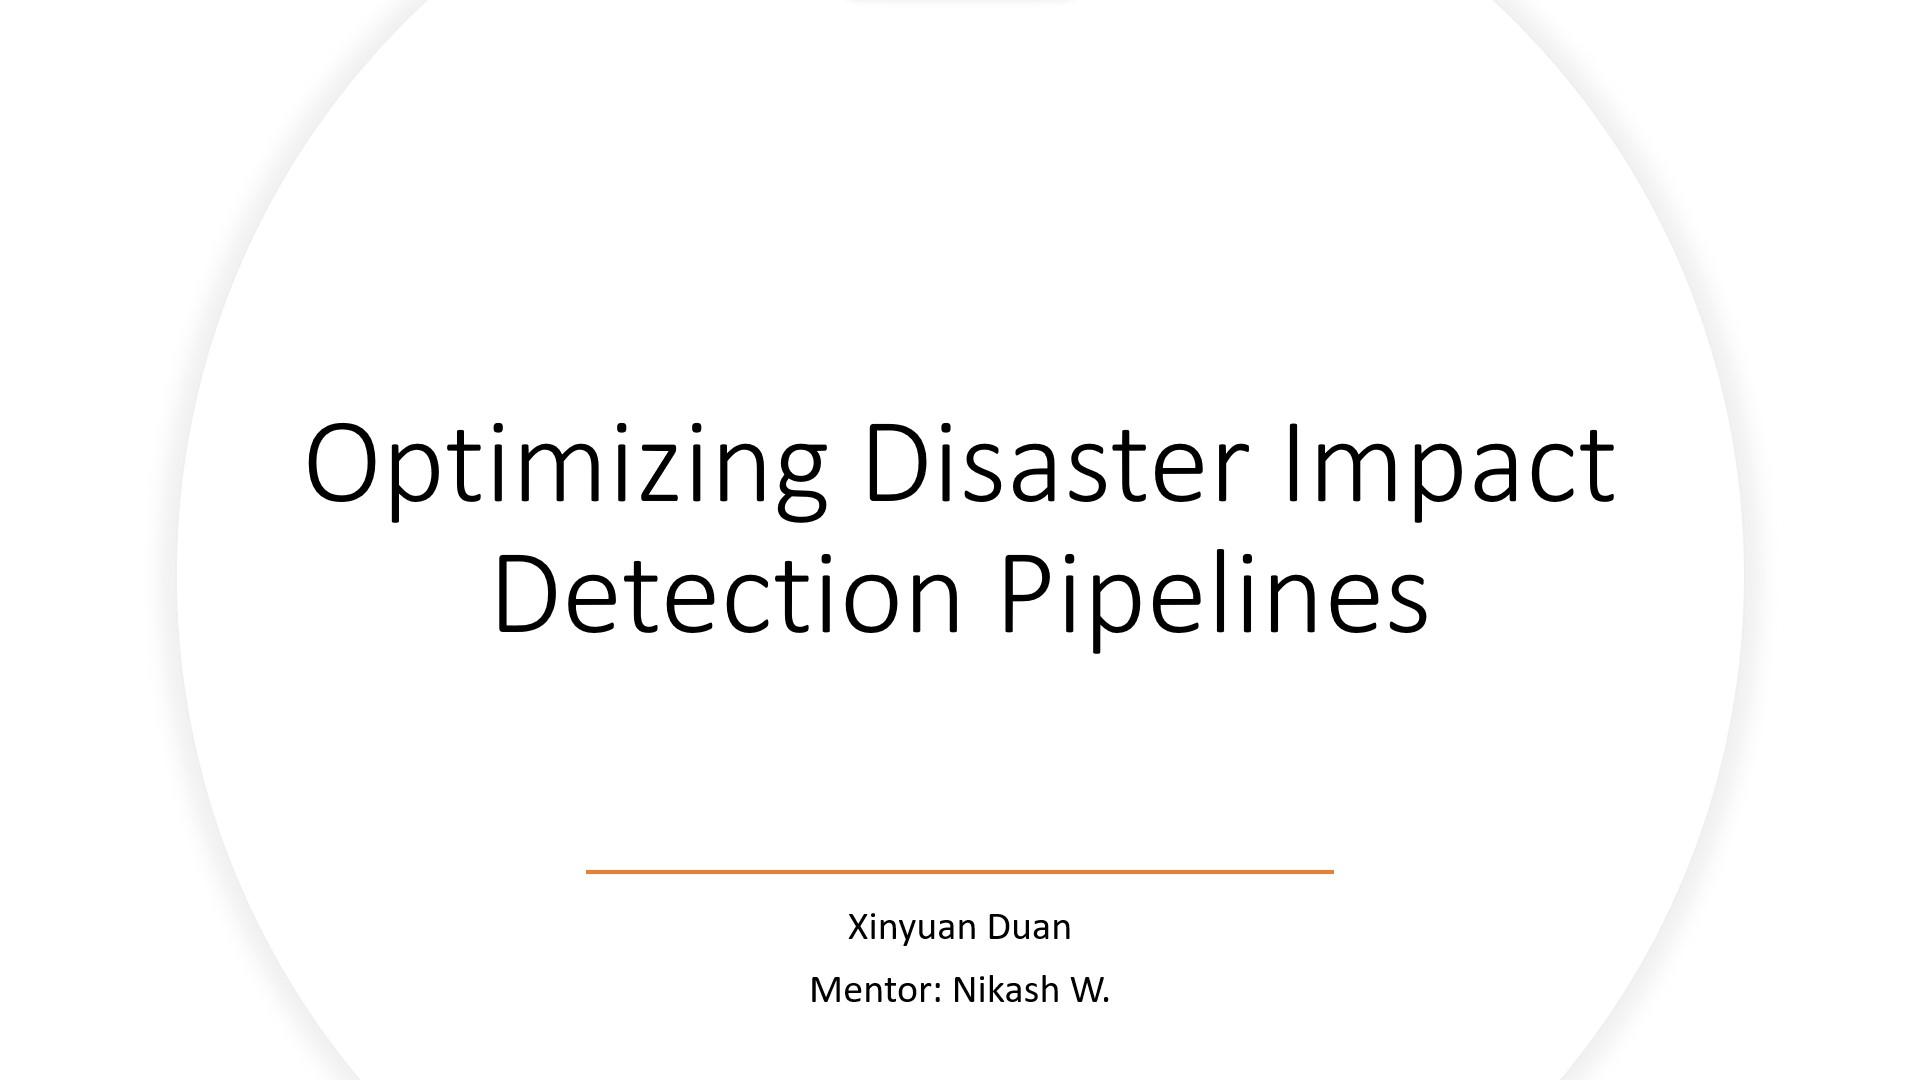 Optimizing Disaster Impact Detection Pipelines